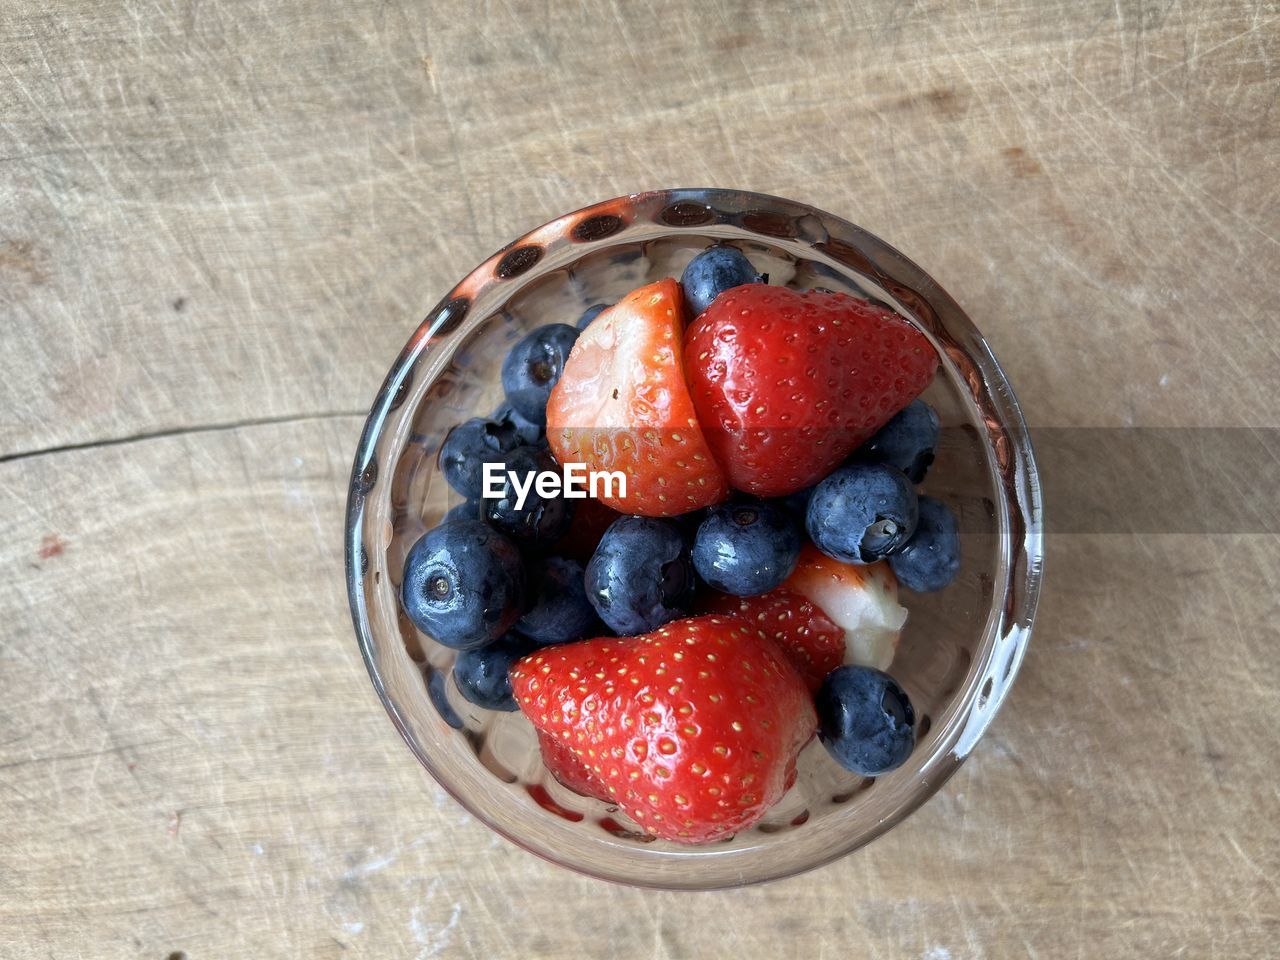 berry, healthy eating, food, food and drink, fruit, freshness, wellbeing, strawberry, plant, bowl, blueberry, directly above, breakfast, high angle view, table, produce, wood, meal, indoors, still life, no people, dessert, raspberry, close-up, red, berries, container, dish, kitchen utensil